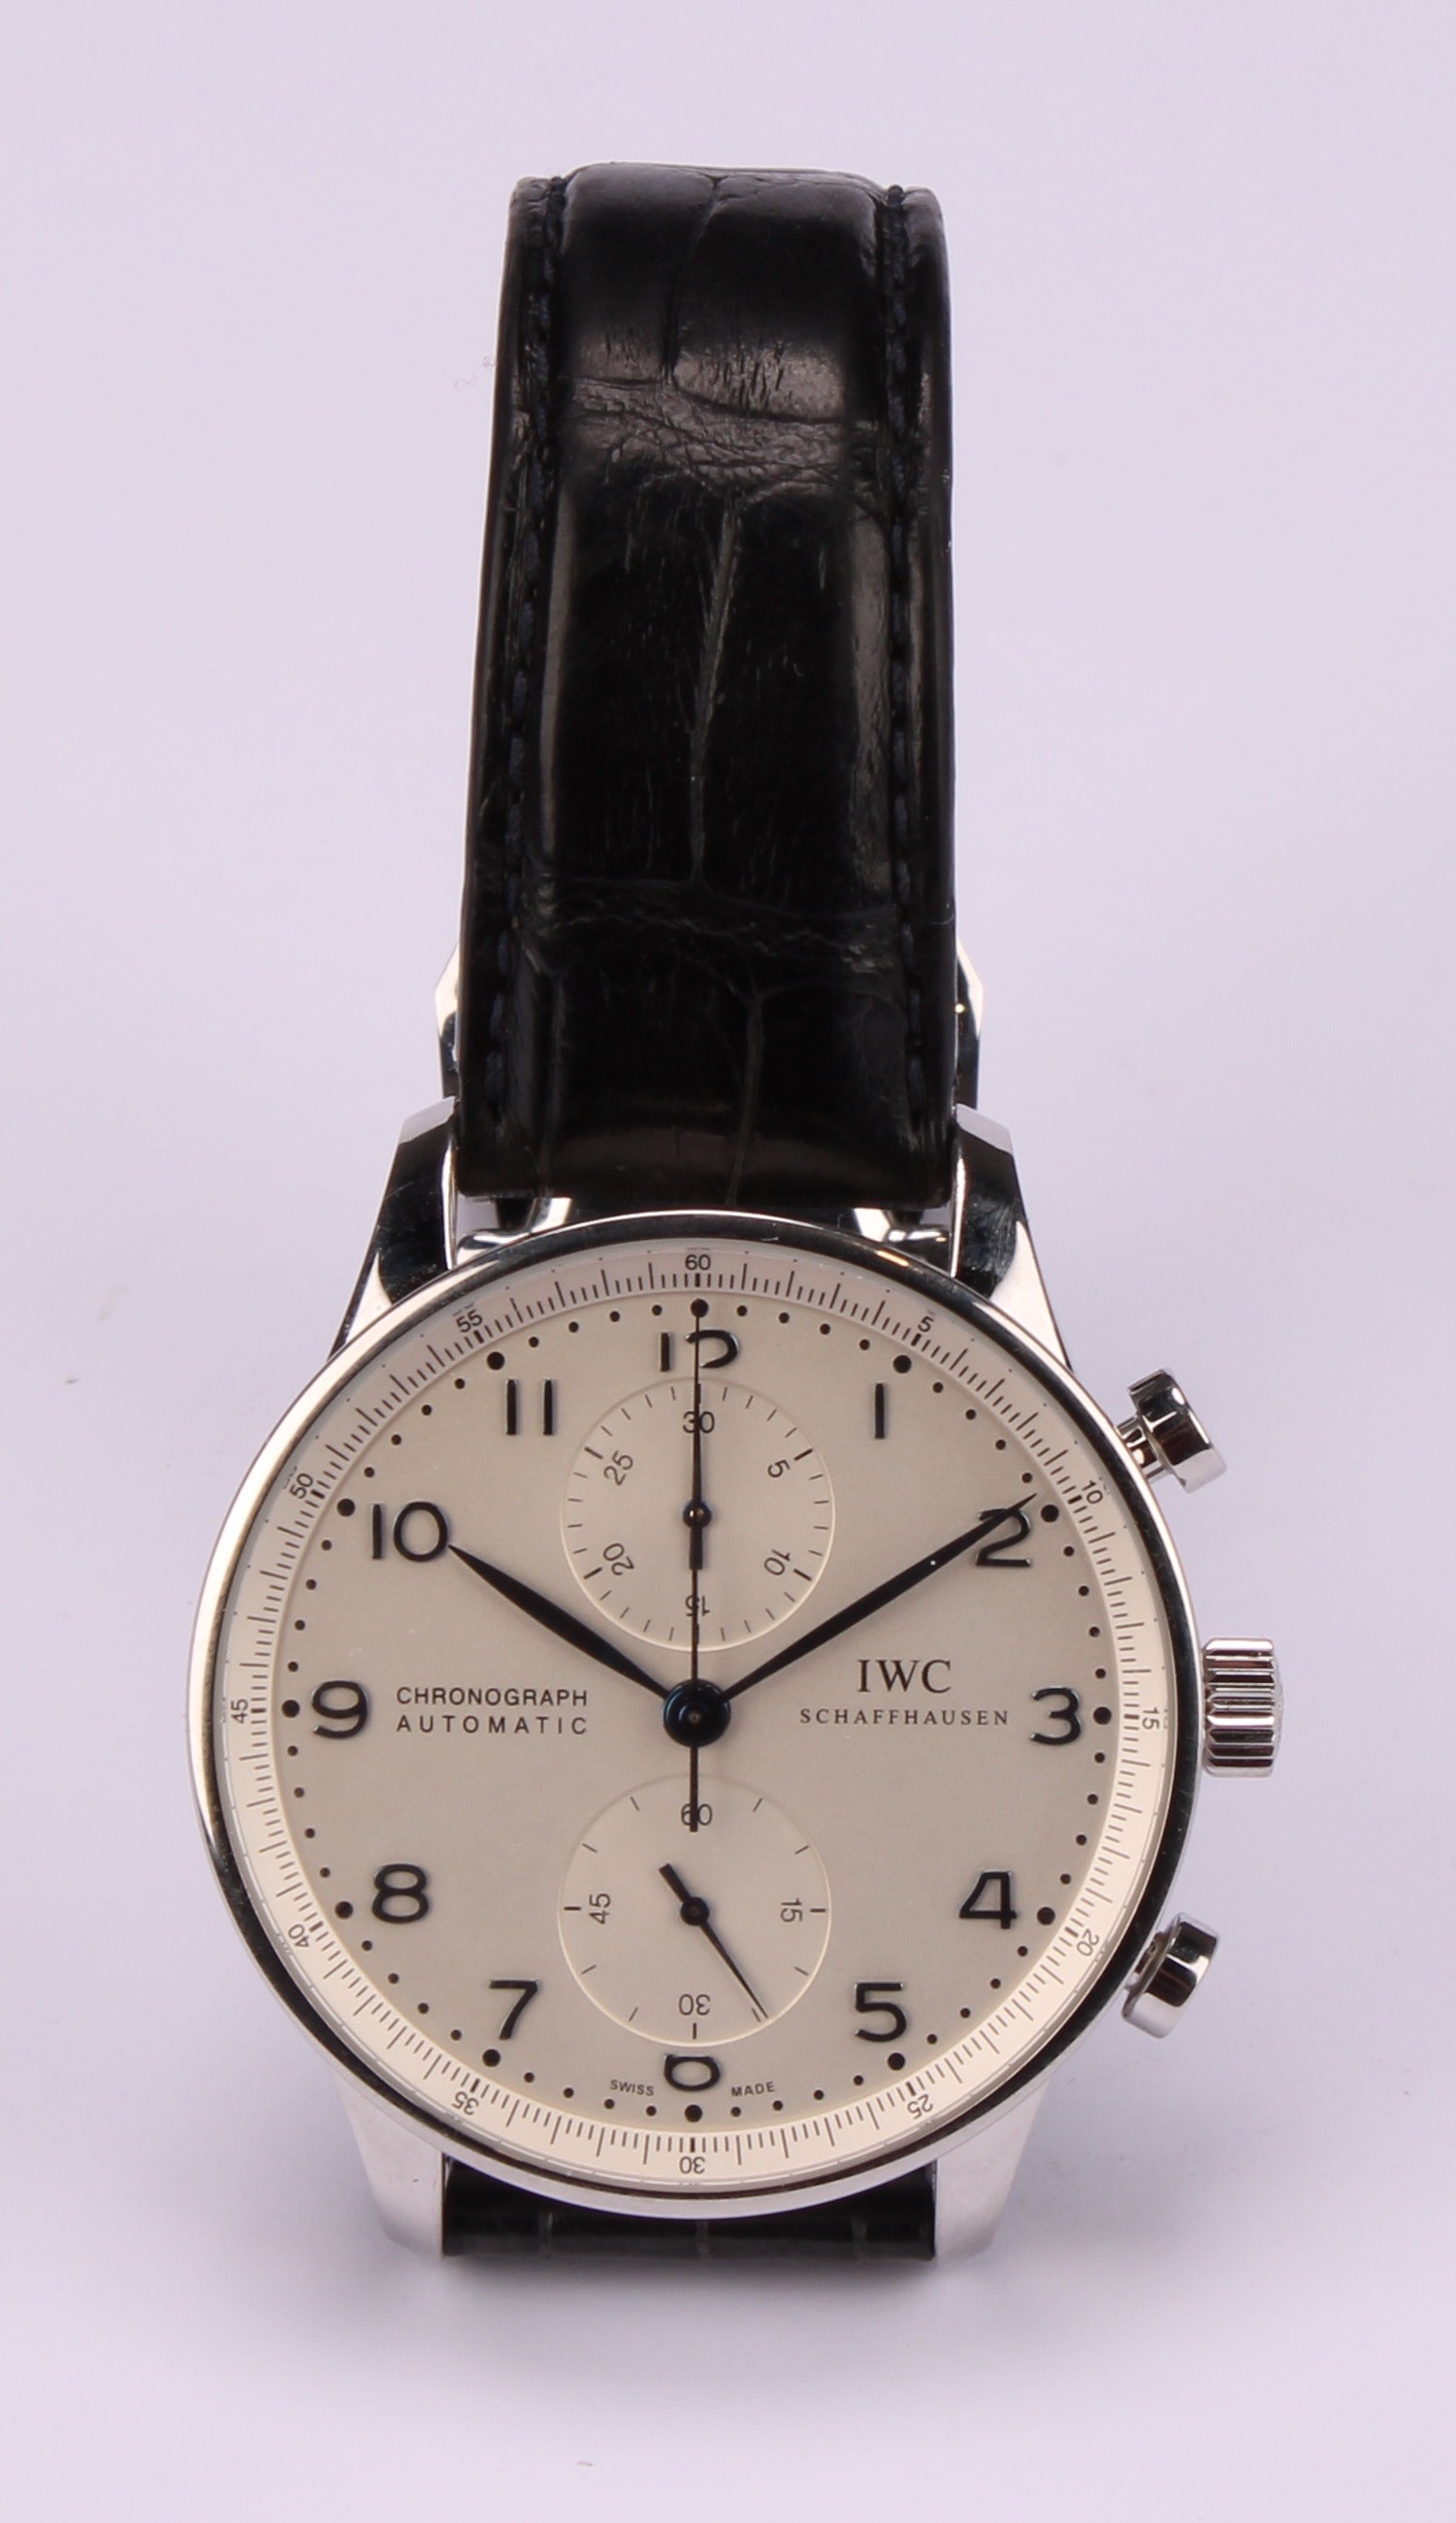 An IWC [International Watch Company] Schaffhausen stainless steel chronograph automatic - Image 2 of 5